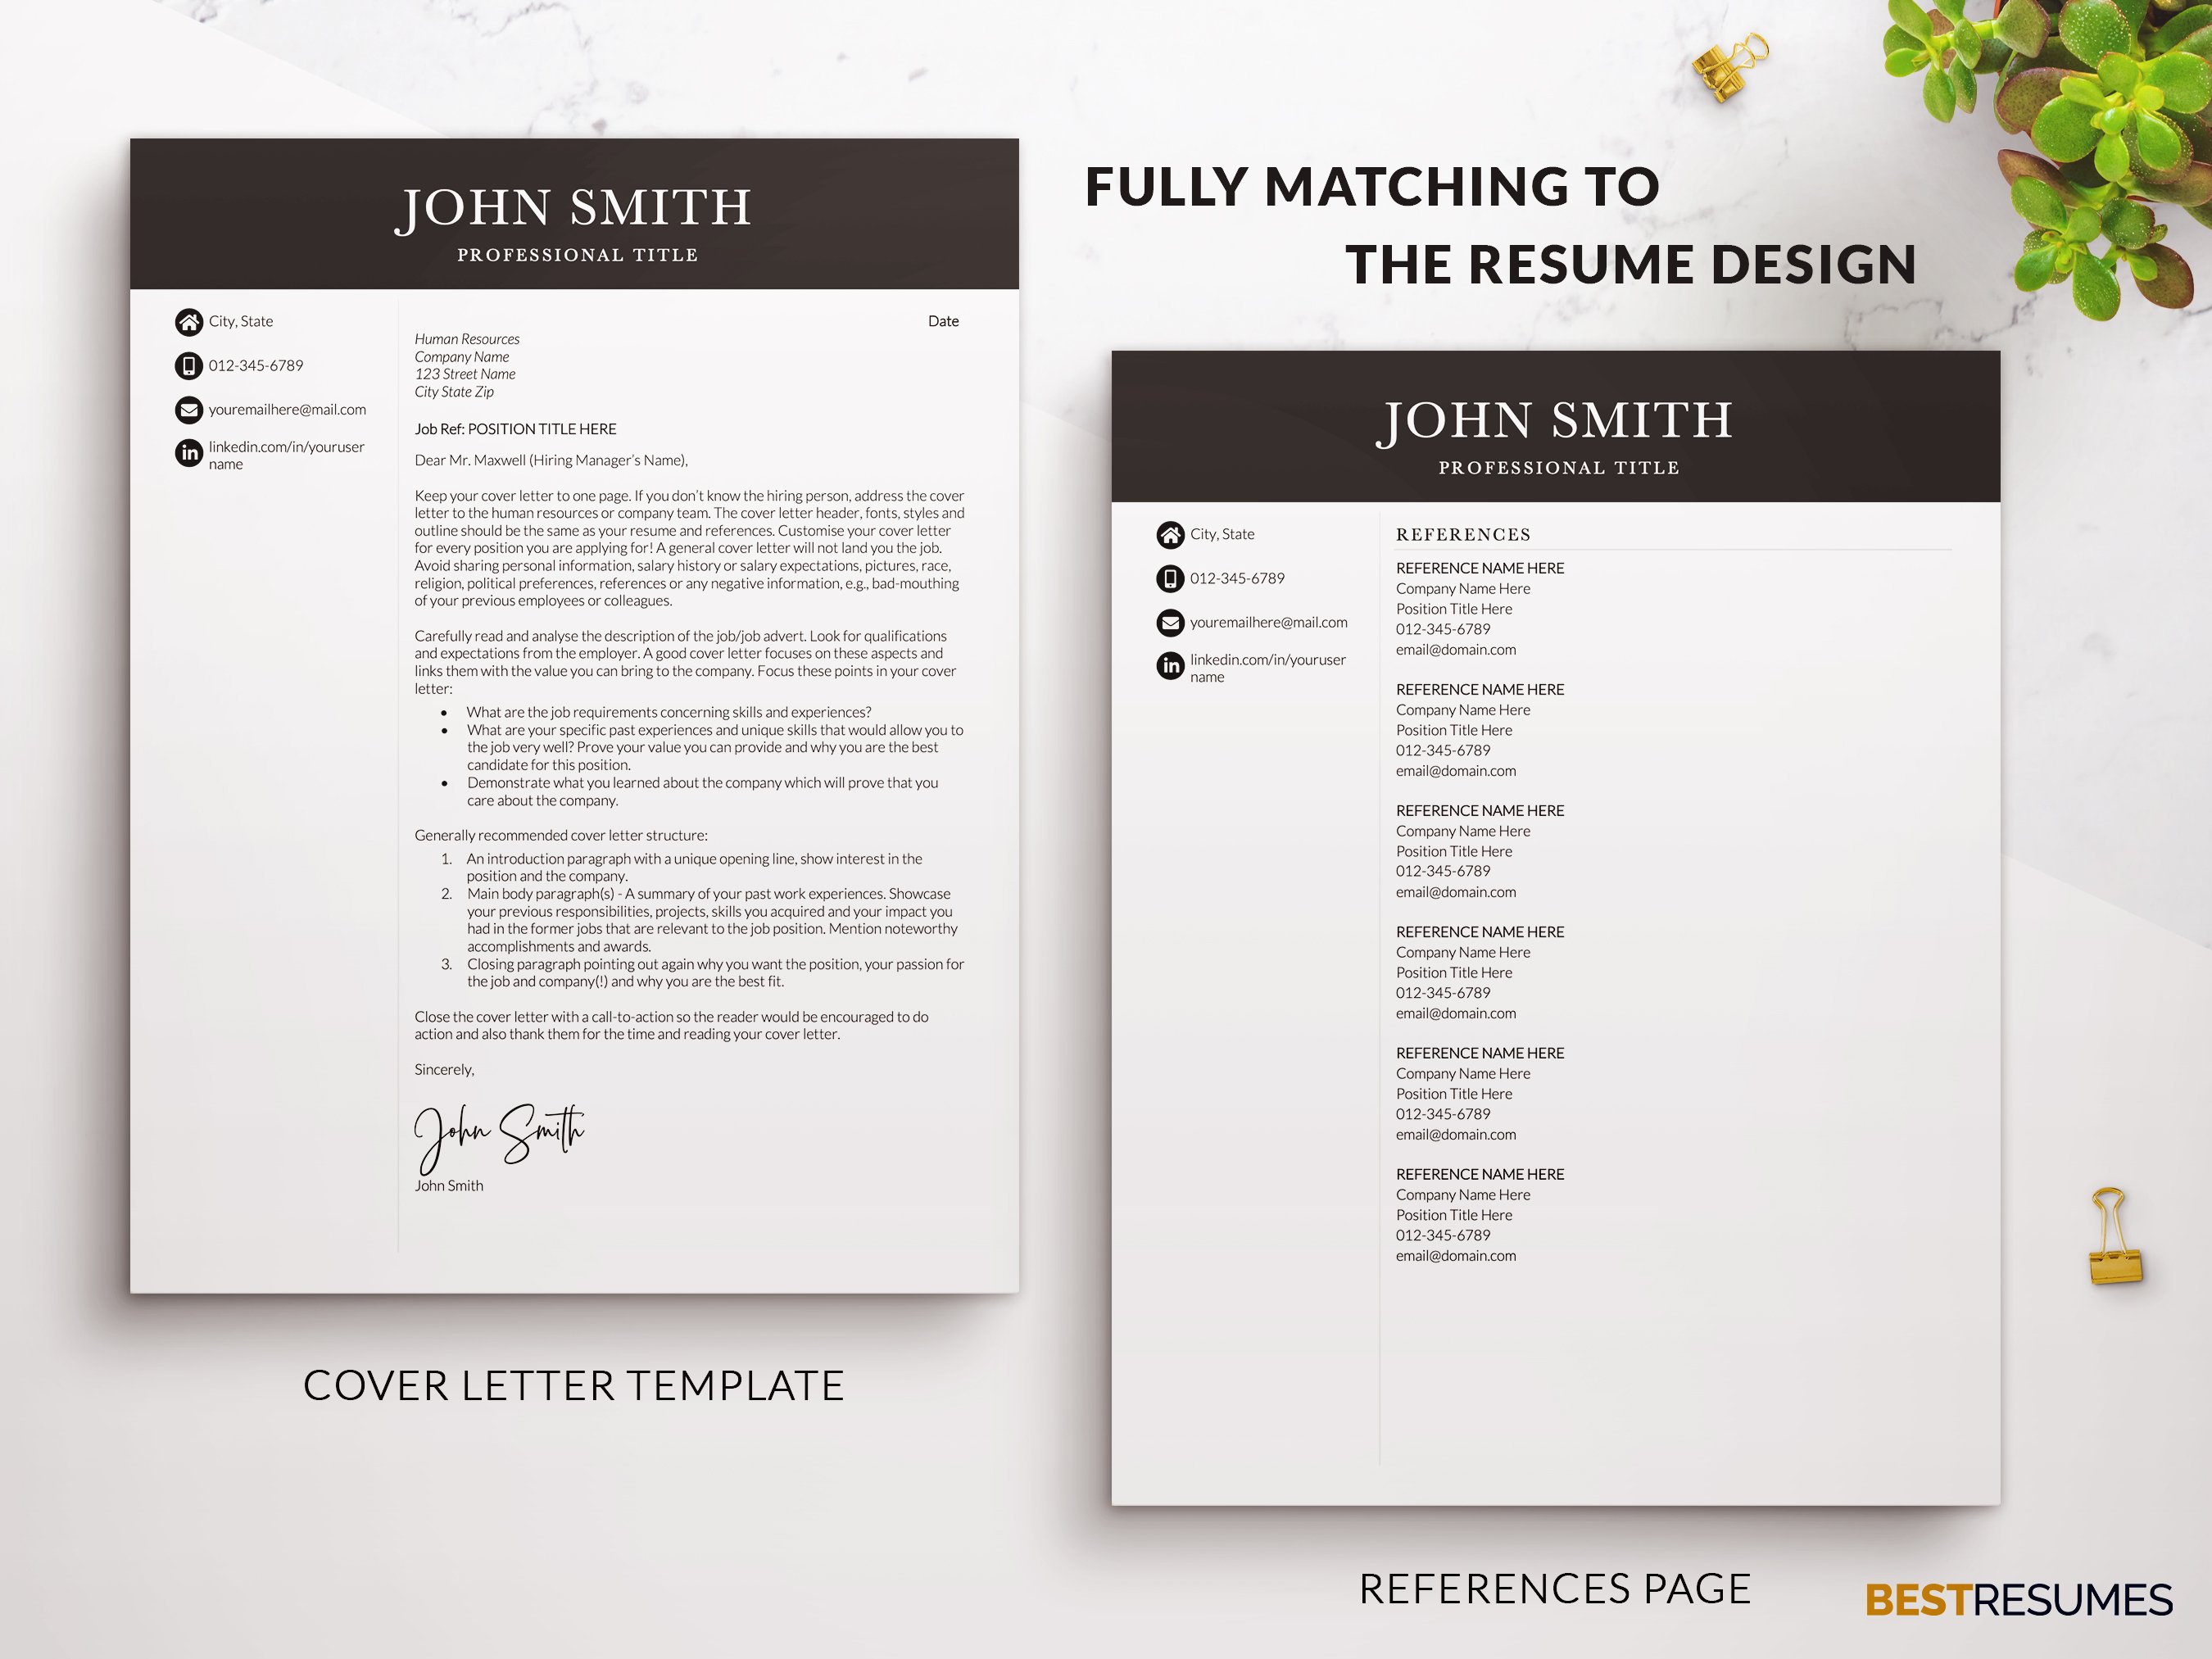 marketing resume template cover letter references john smith 44